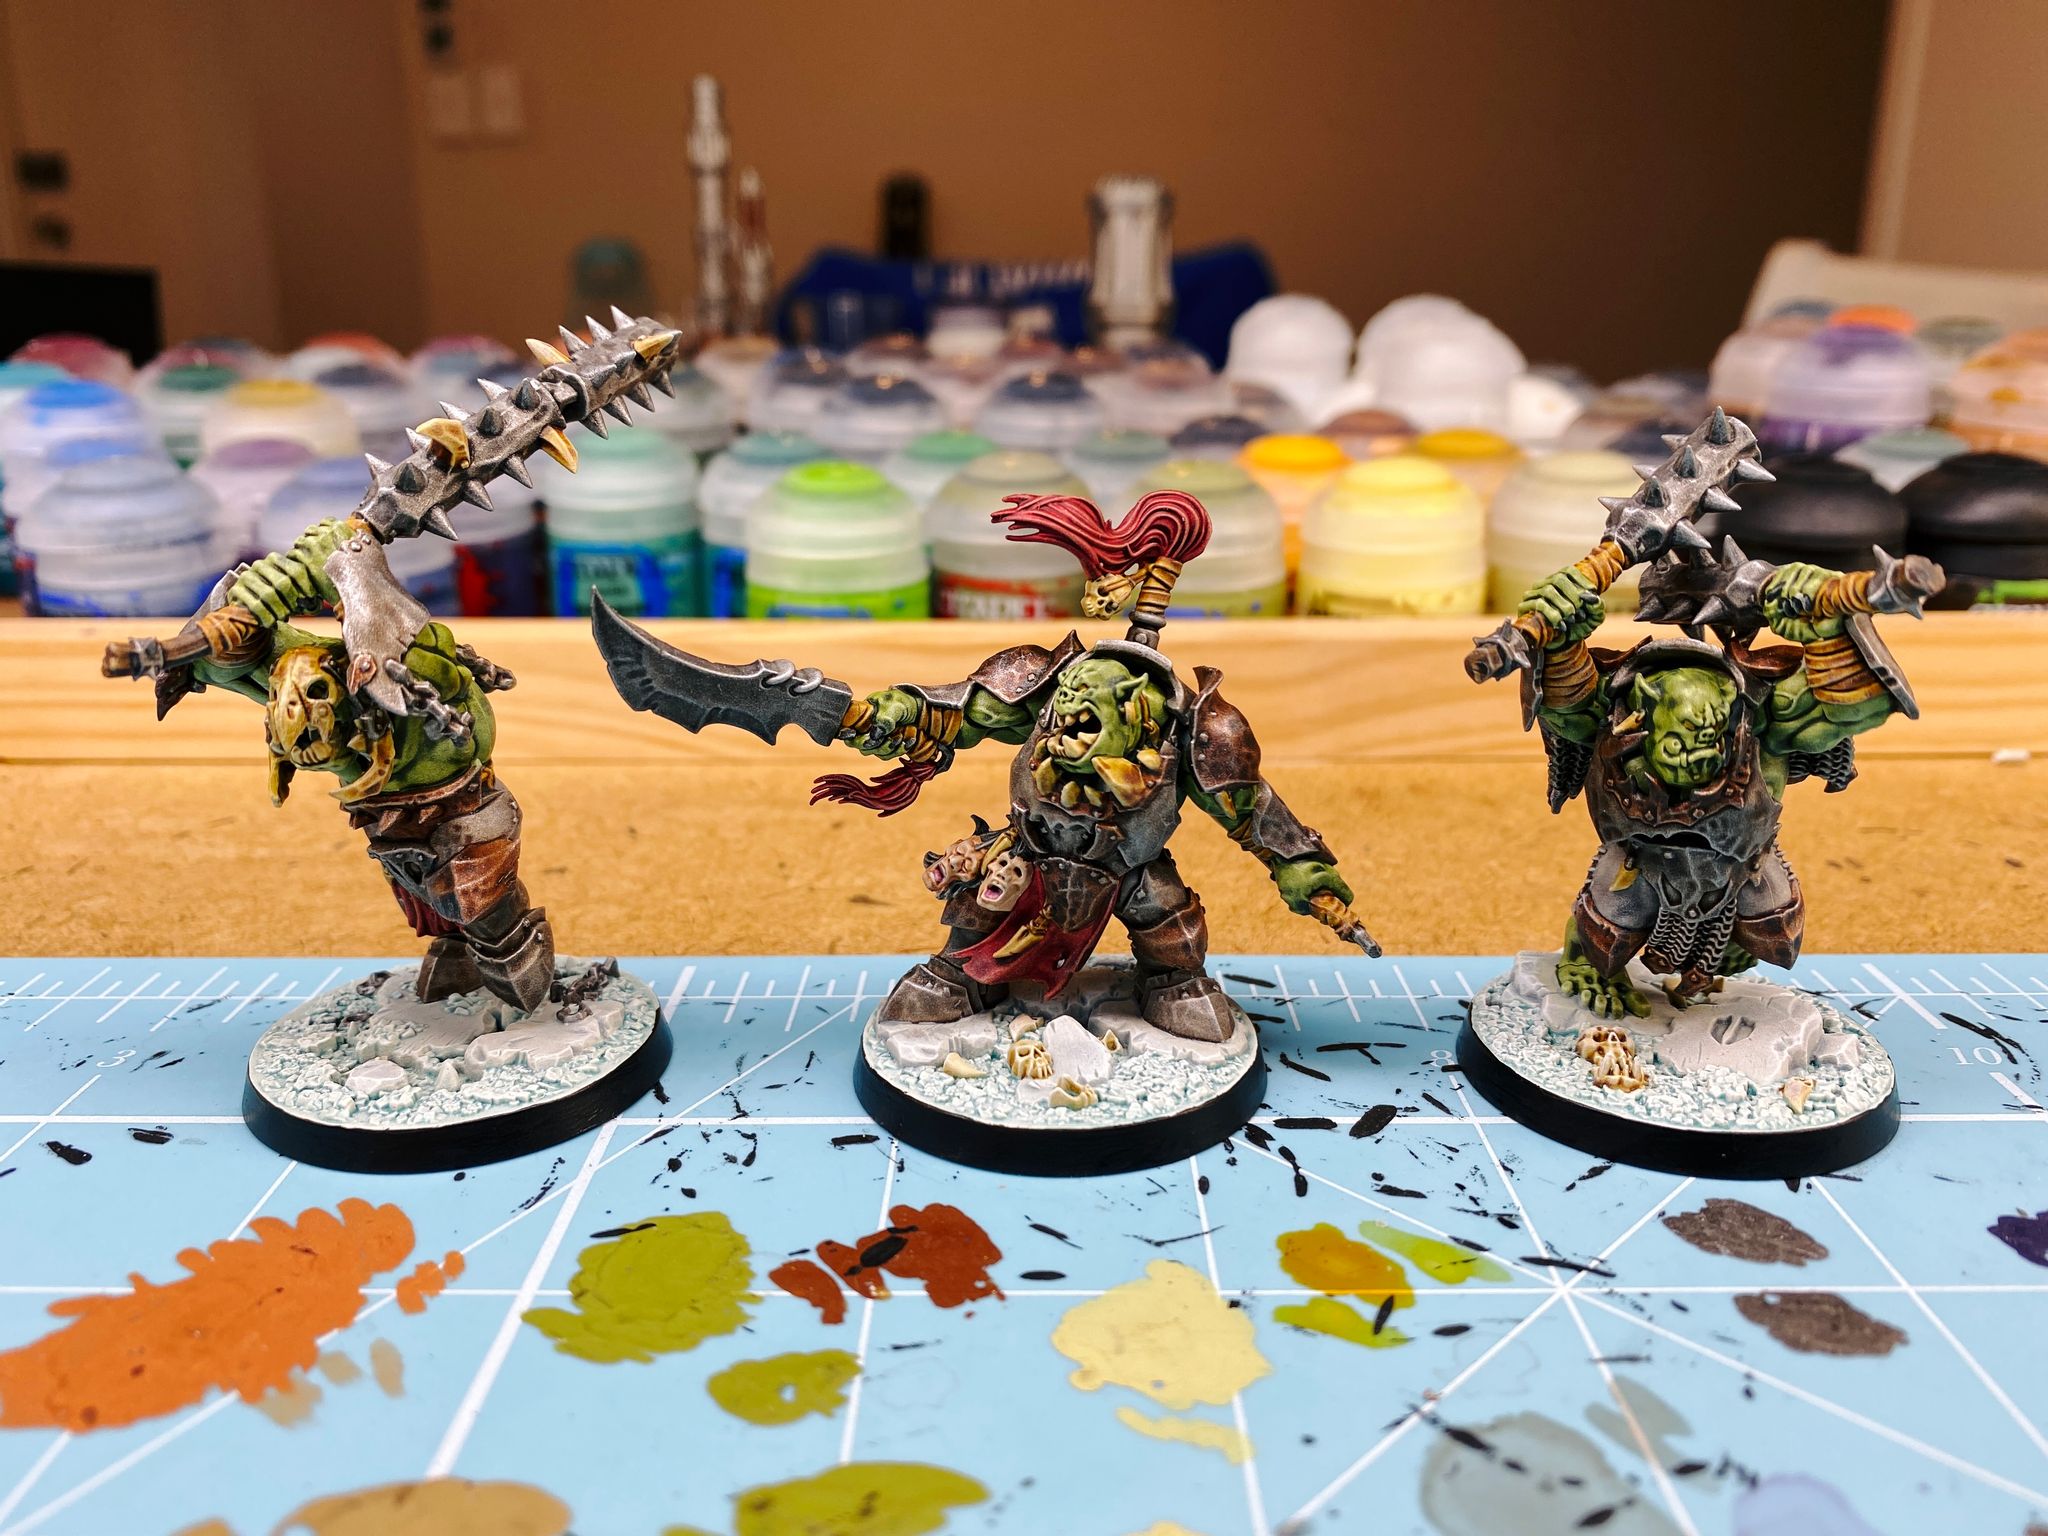 A photo of three fully painted "orruks" (Games Workshop speak for orks). They're all in battered-looking dark metal and bronze armour, the leader is pointing a sword and roaring, and the other two are mid-weapon swing. One mid-swing one is holding two metal clubs with spikes coming out of them, and the other's is the same club-looking things but joined together in a nunchuck-like fashion. Their bases are pale blue and white like snow.